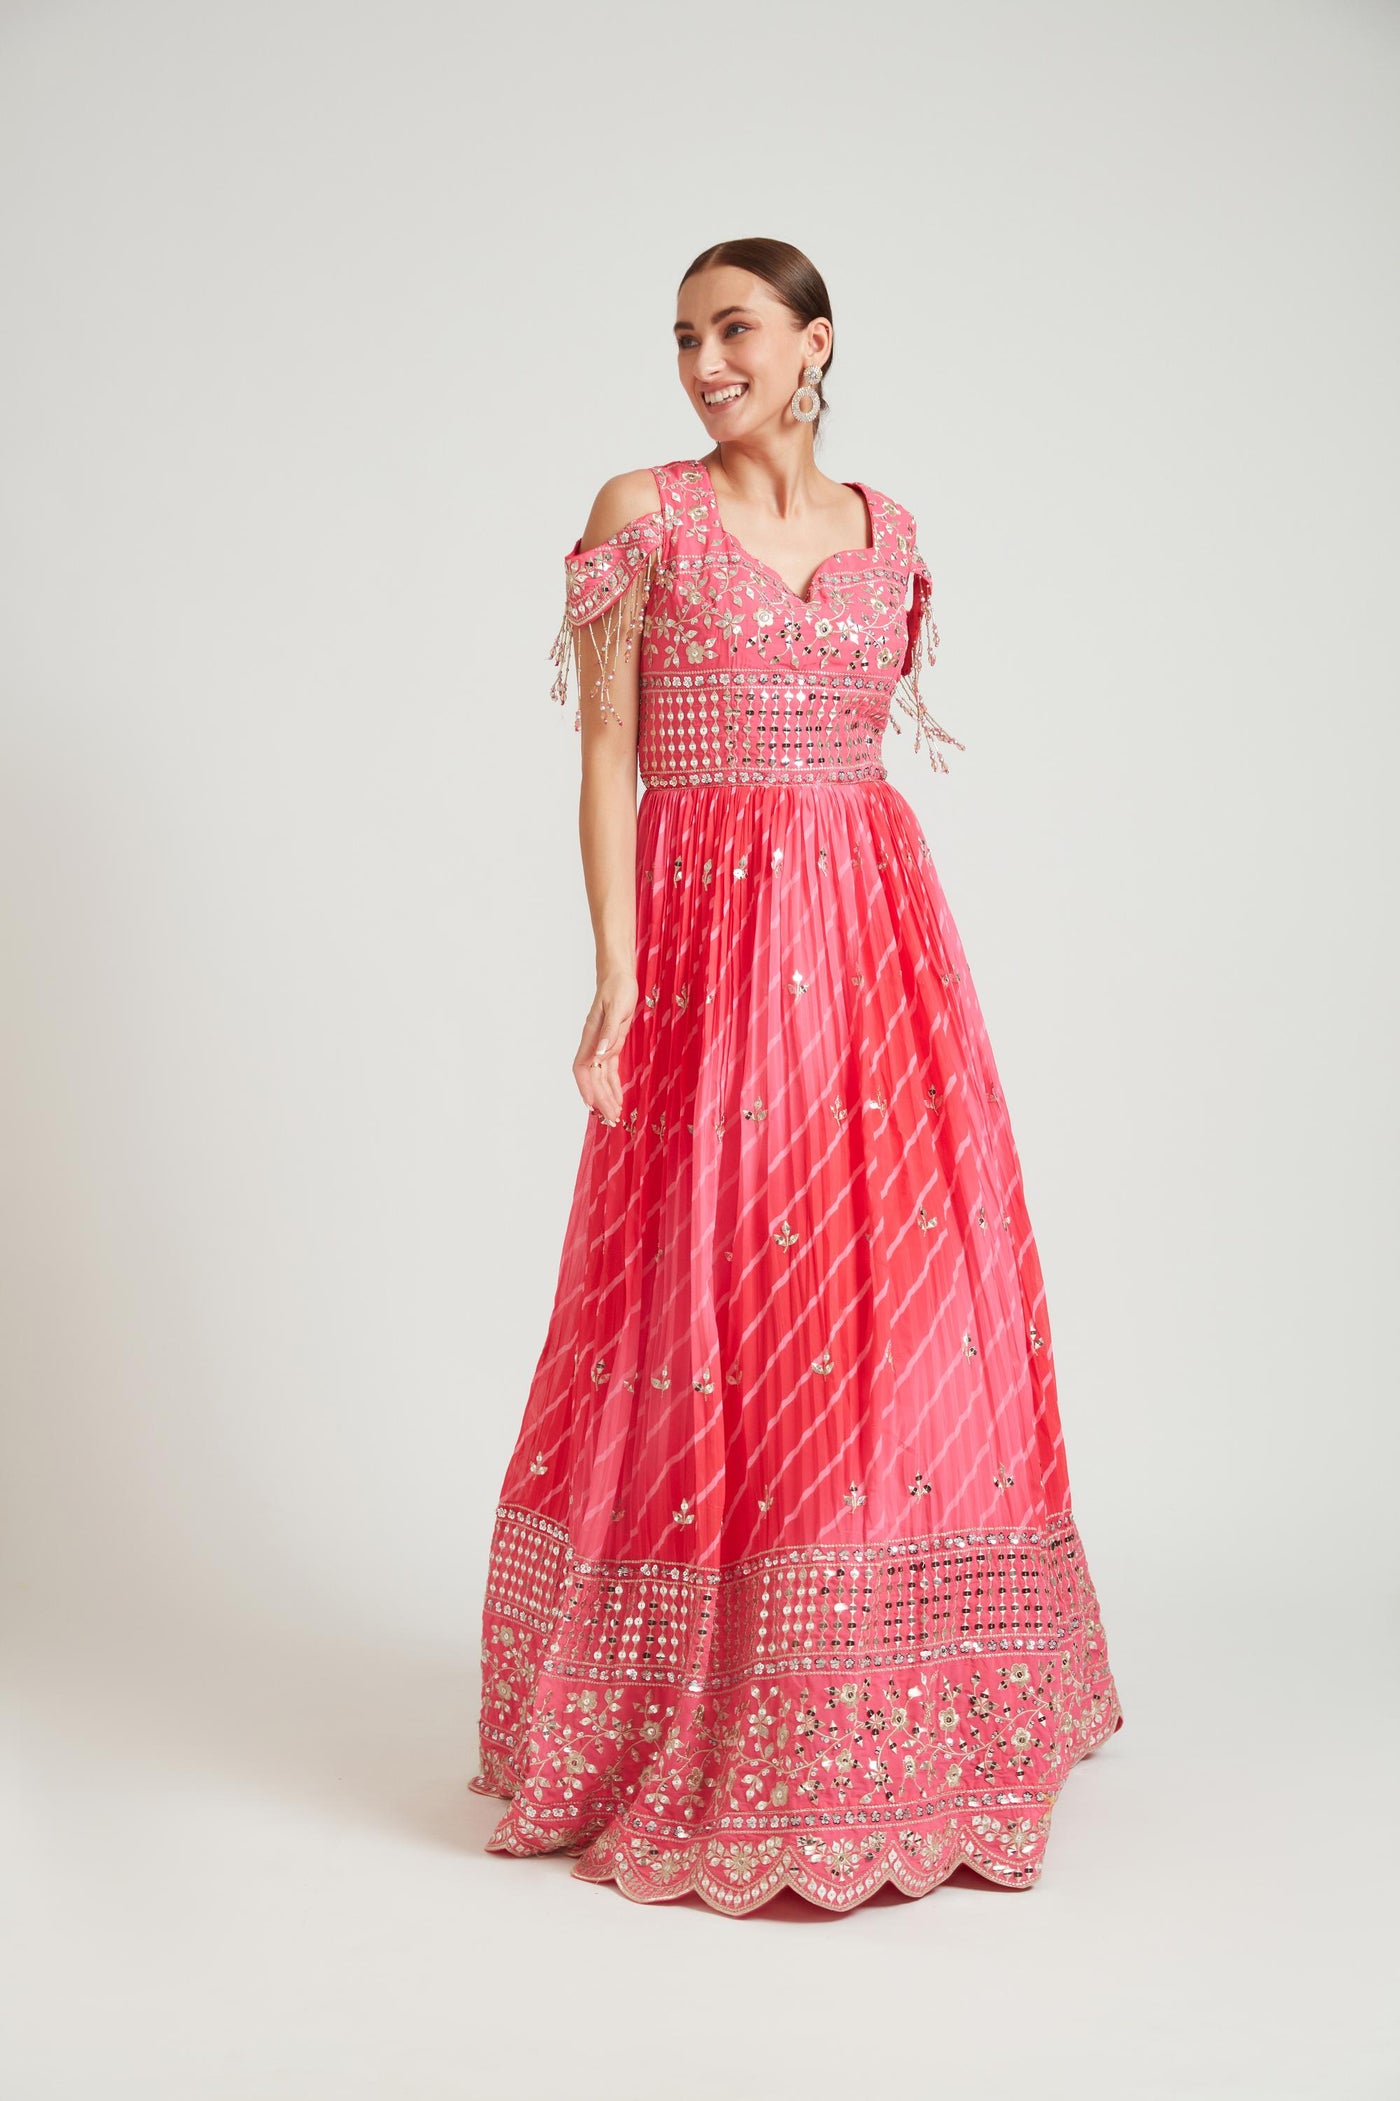 Neeru's Pink Color Georgette Fabric Gown